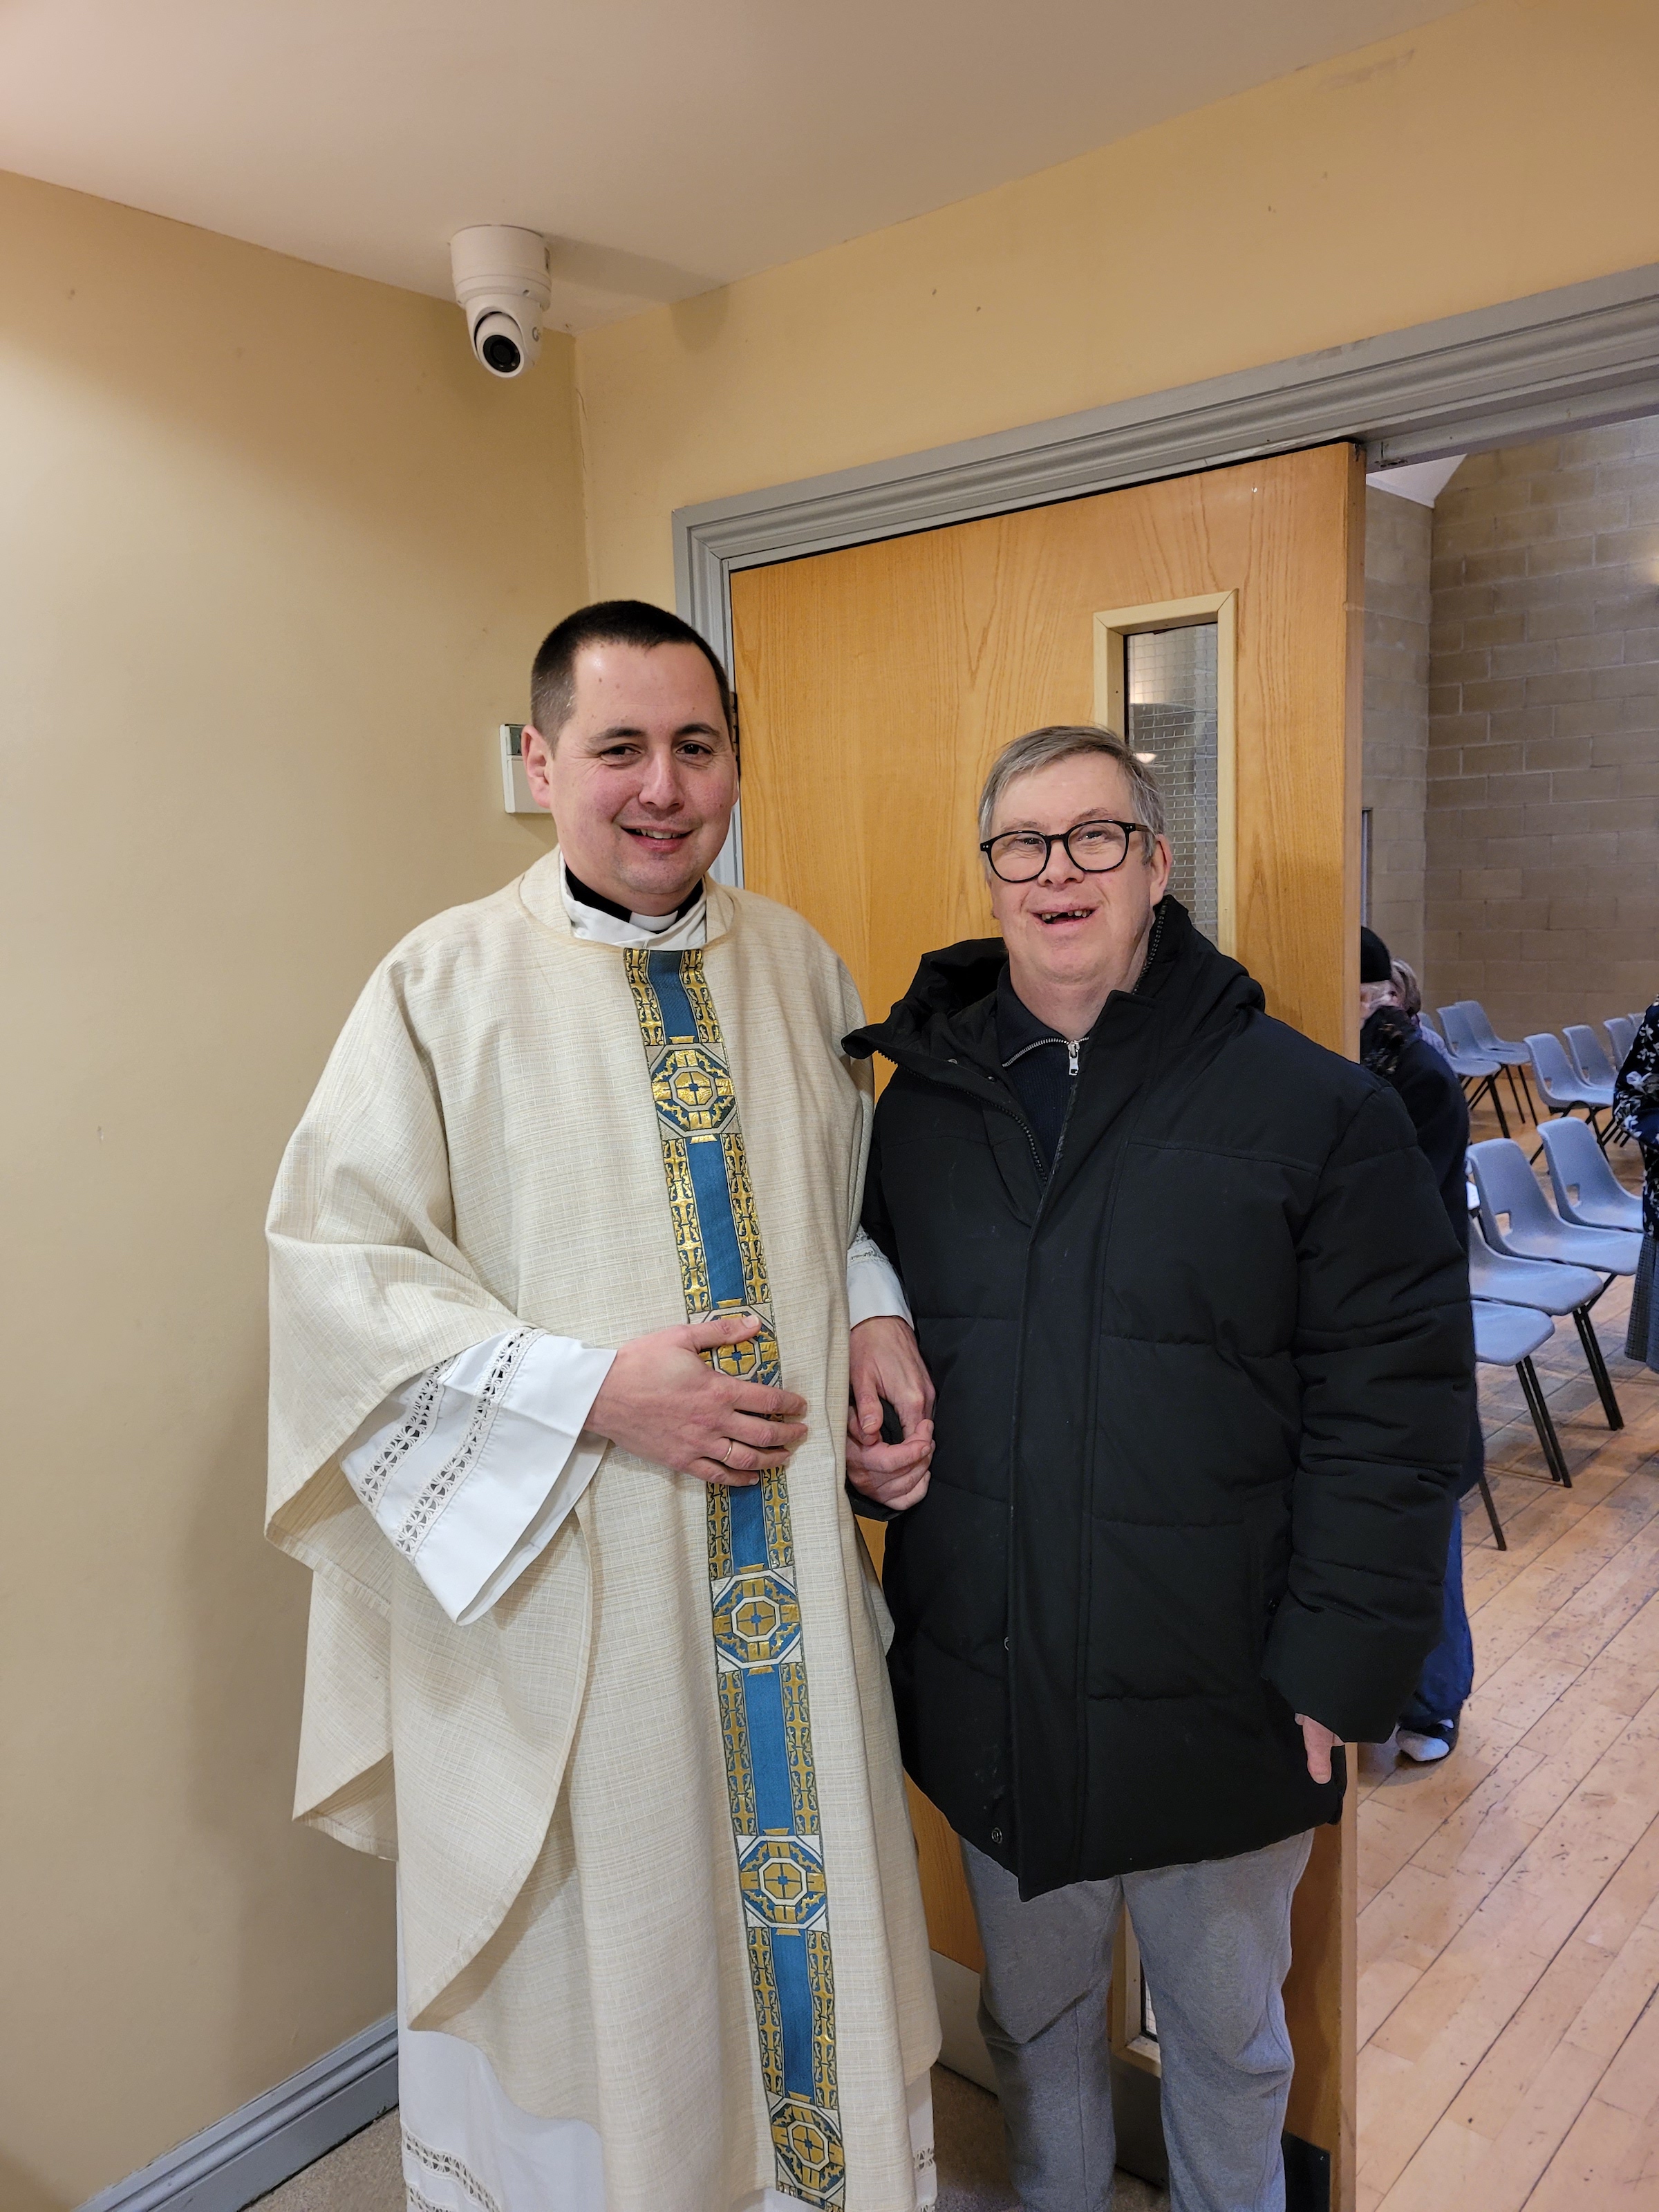 Stephen stood smiling with his priest.